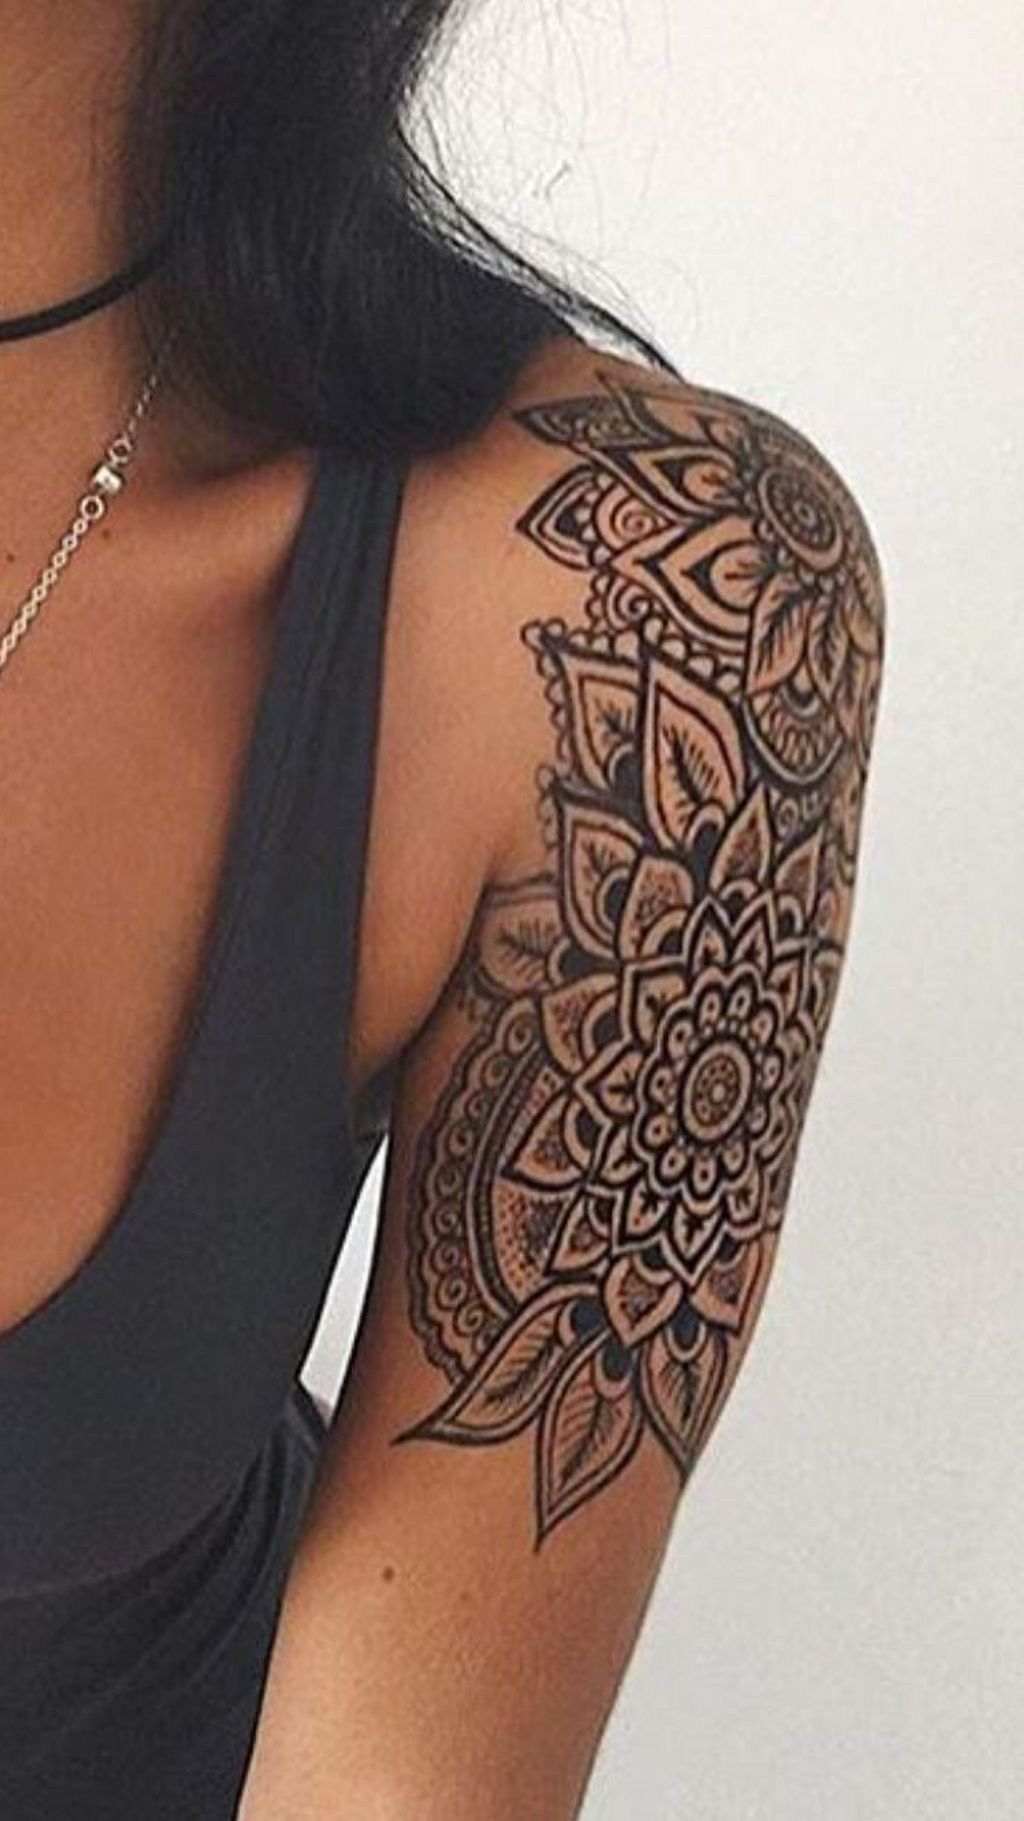 Cute Henna Lace Arm Tattoo Ideas You Should Try 17 Meaningful for dimensions 1024 X 1821